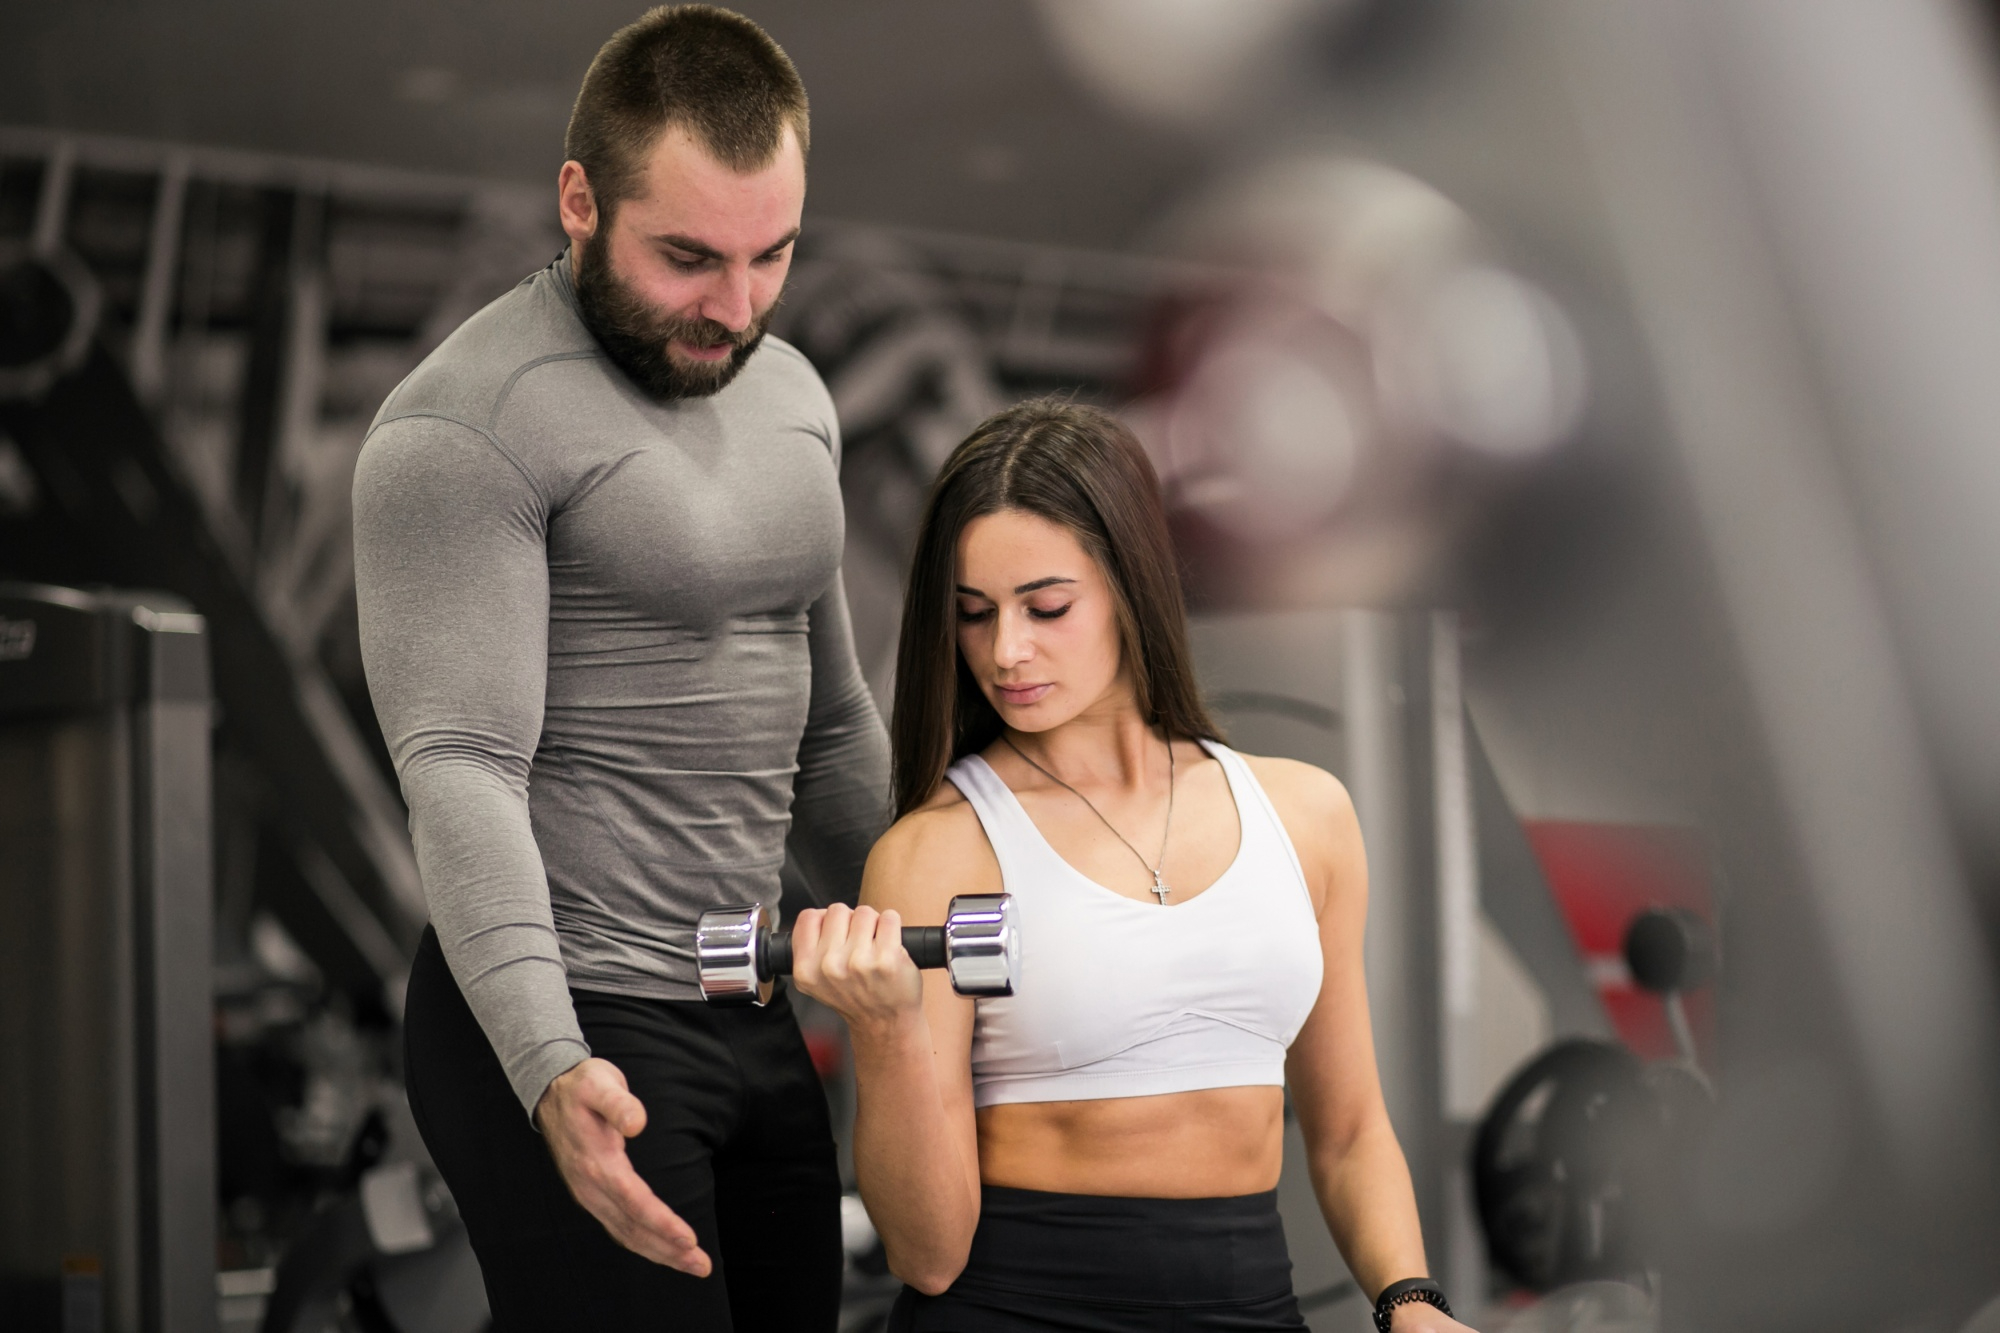 Online Personal Trainers for Women - Ladies Who Lift